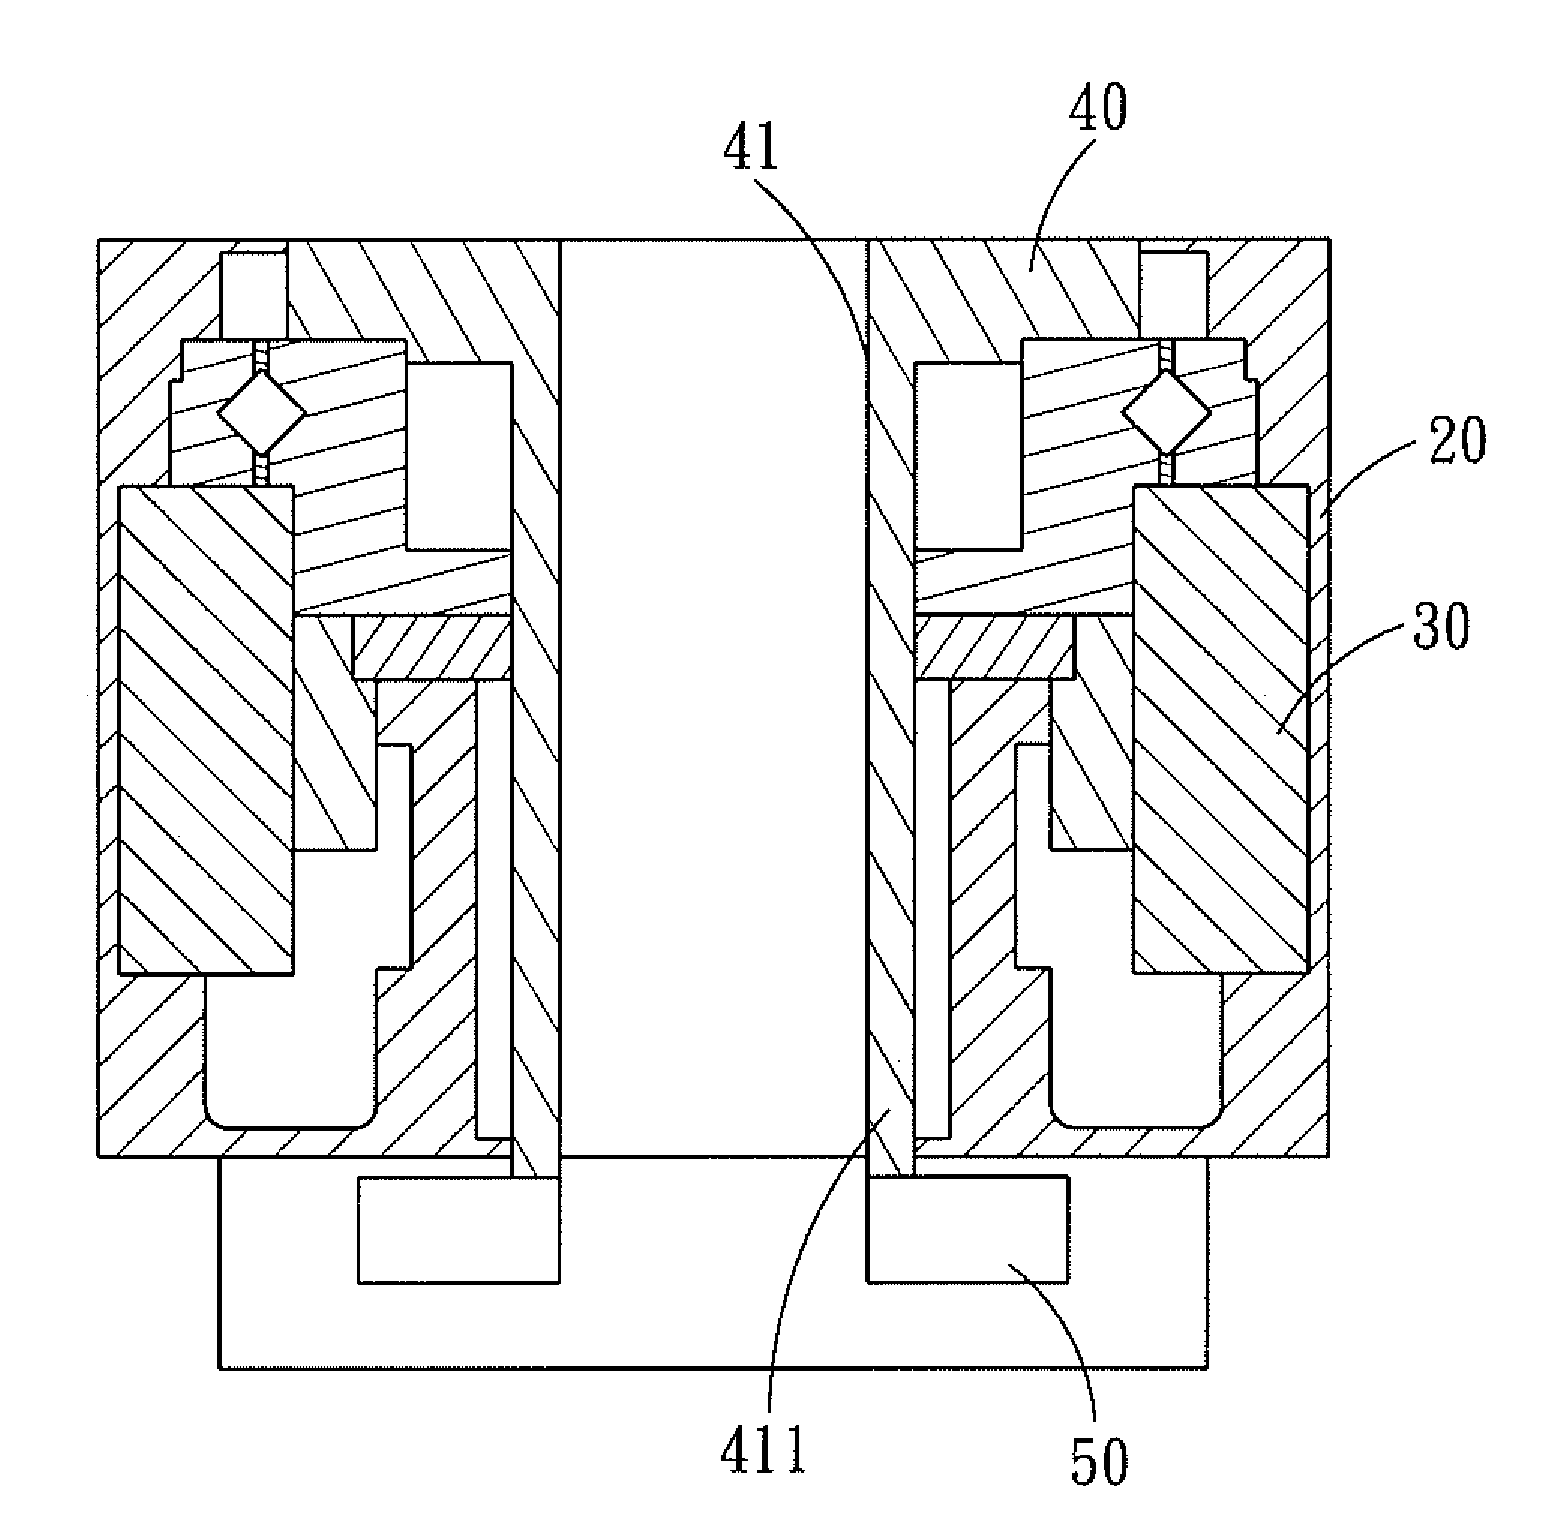 Motor Structure with a Brake Device